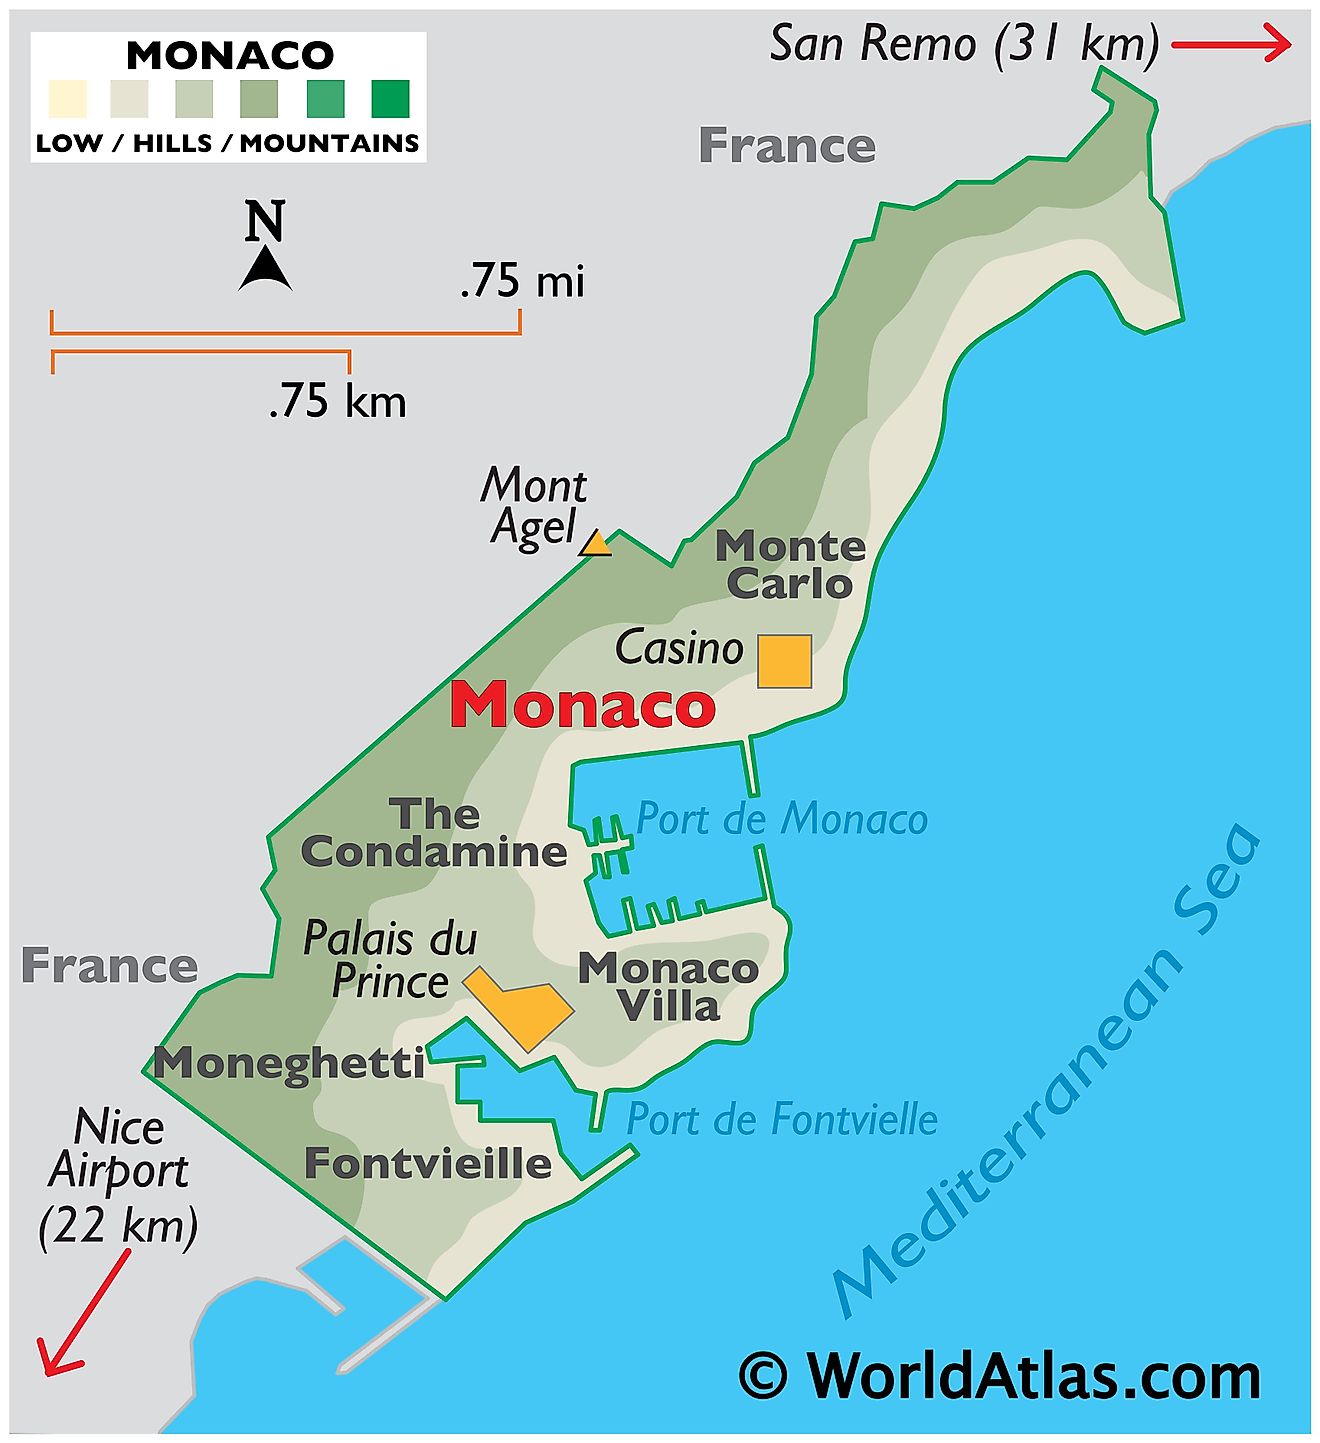 Physical Map Monaco showing relief, coast, ports, important urban centres, the highest point of Mont Agel, and the Casino.